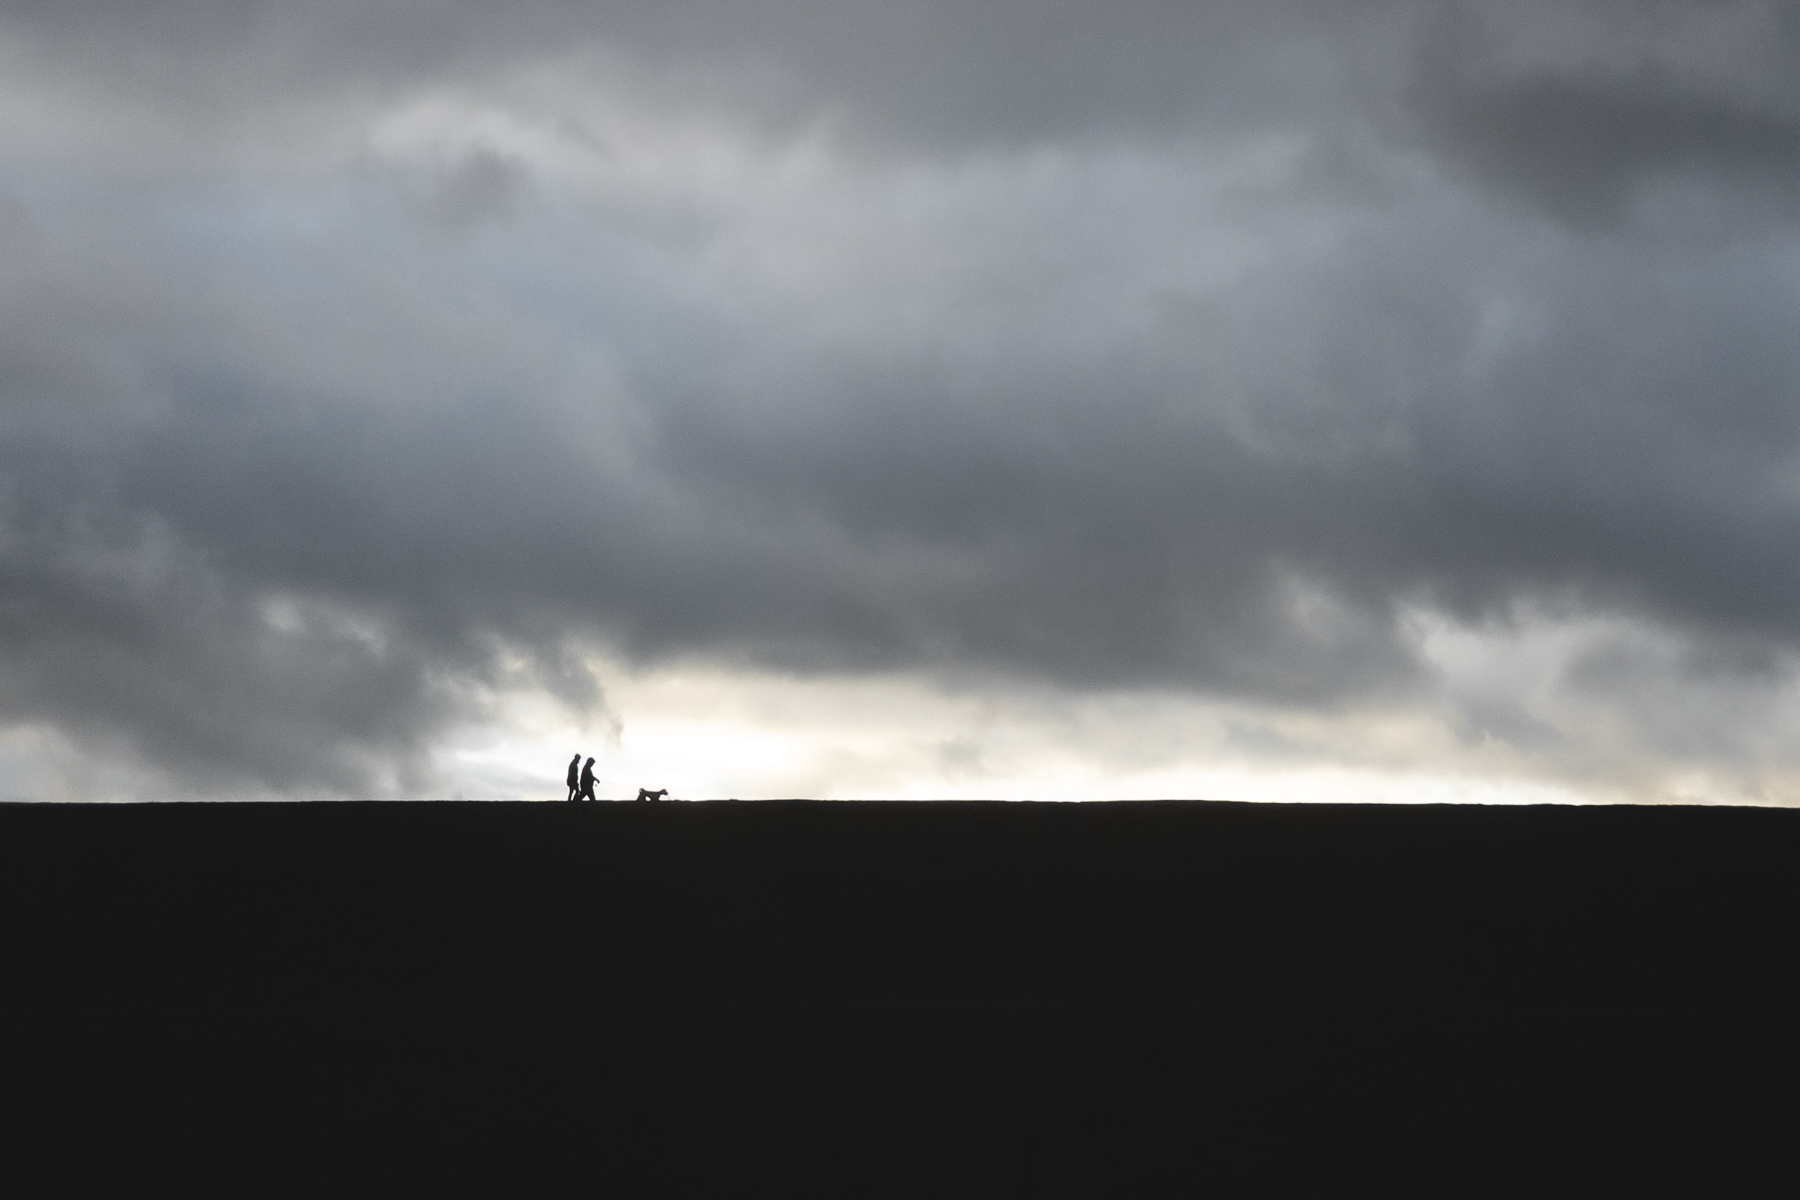 Silhouetted figures walking a dog on a ridge under a dramatic cloudy sky